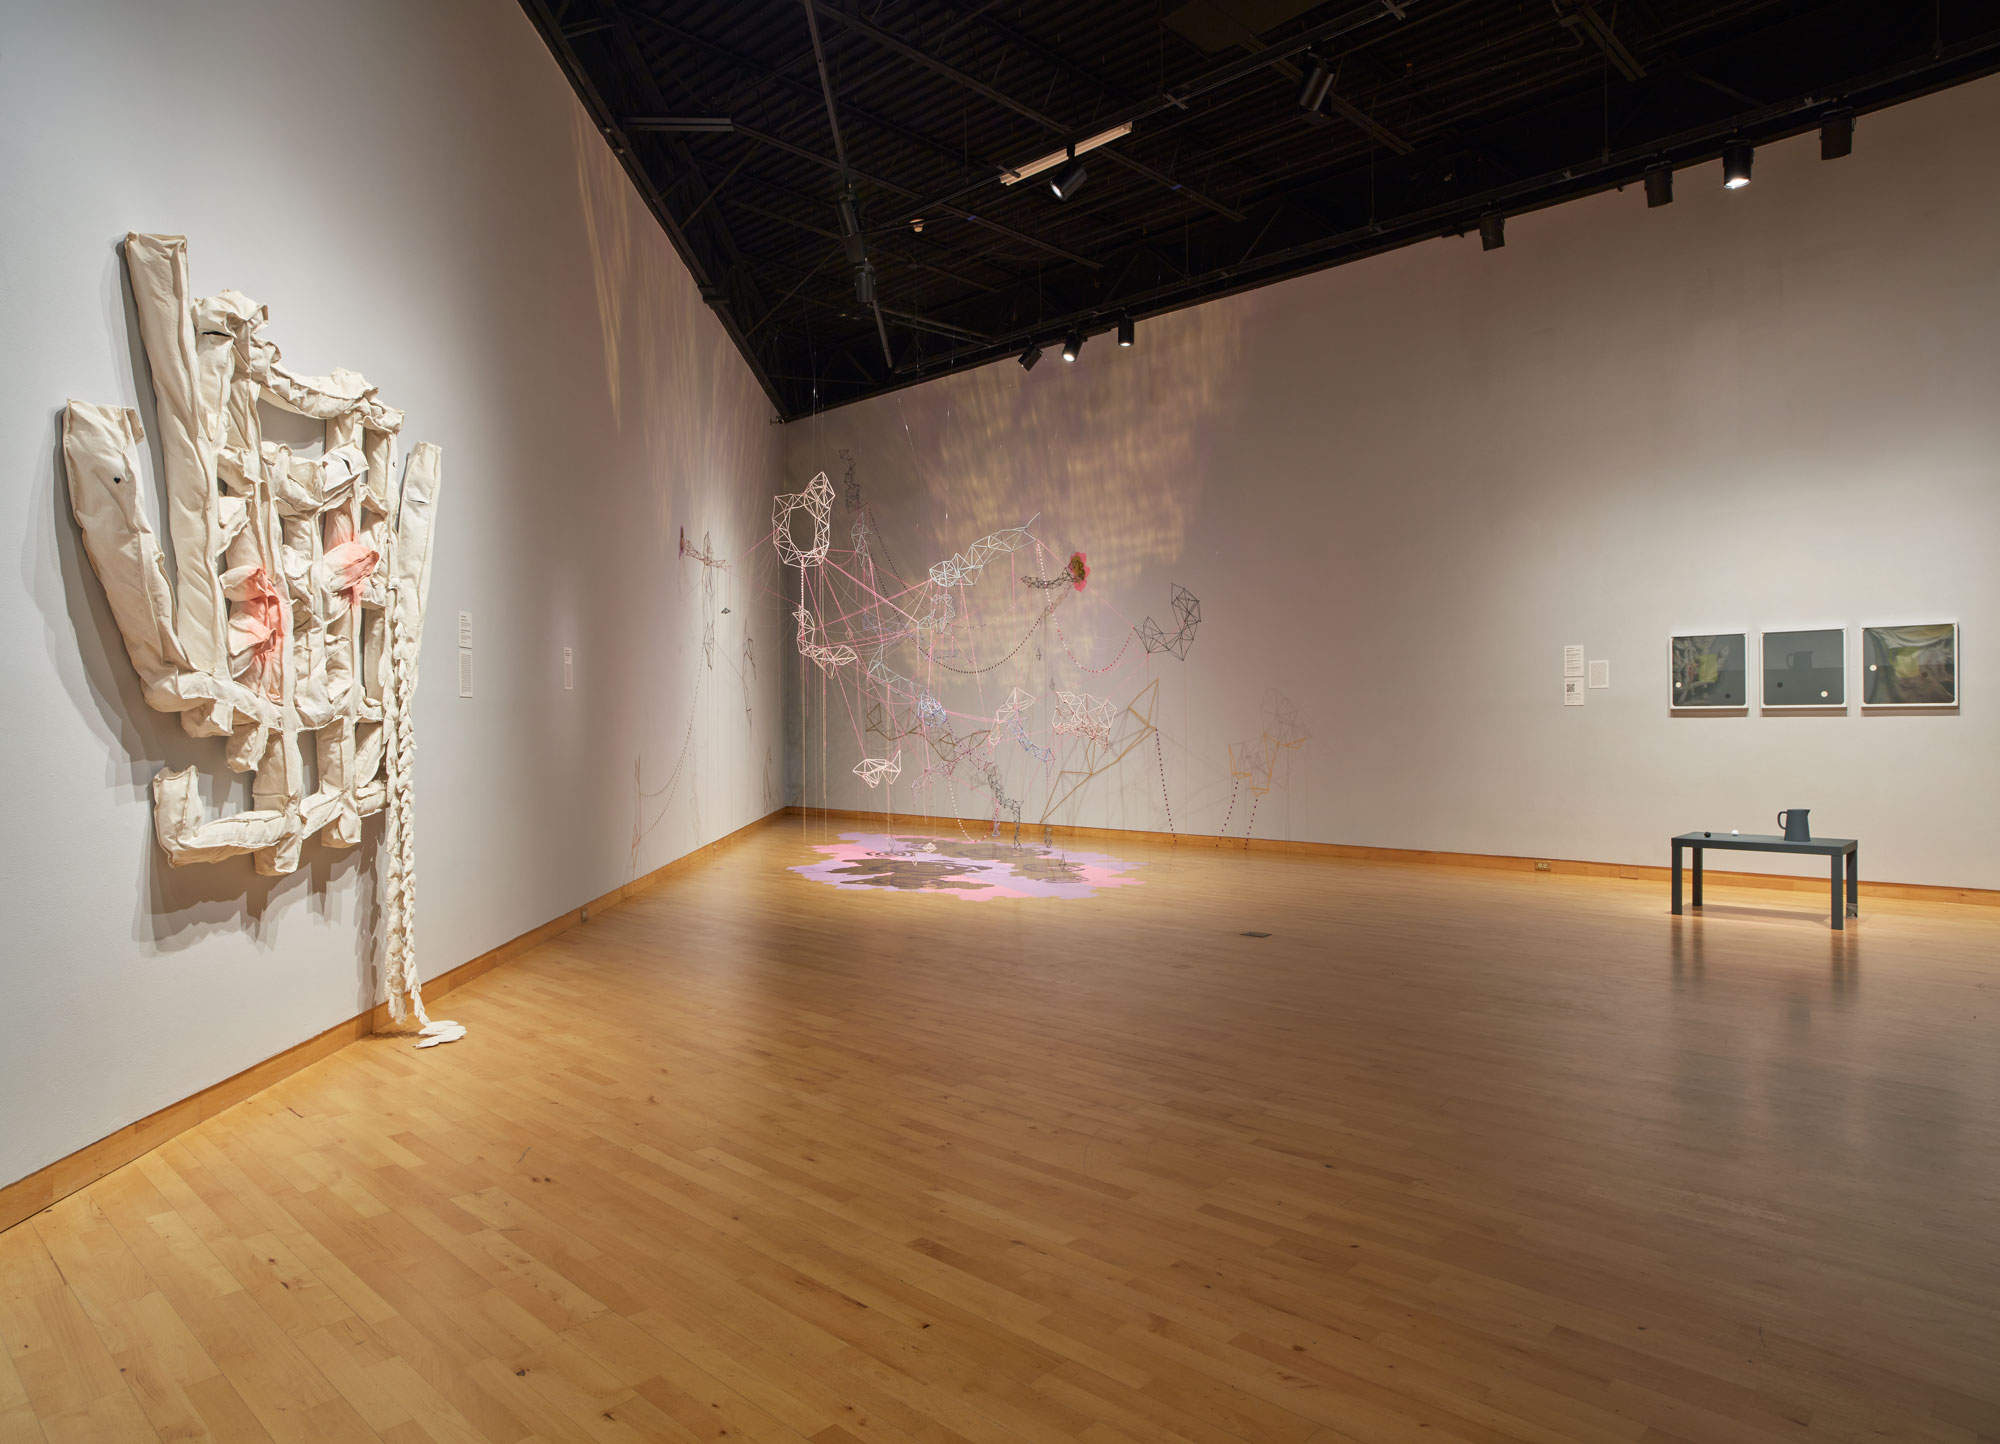 Installation view of Skyway 20/21 exhibition at USF Contemporary Art Museum. Left to right: works by Cynthia Mason, Casey McDonough, and Ry McCollough. Photo: Will Lytch.